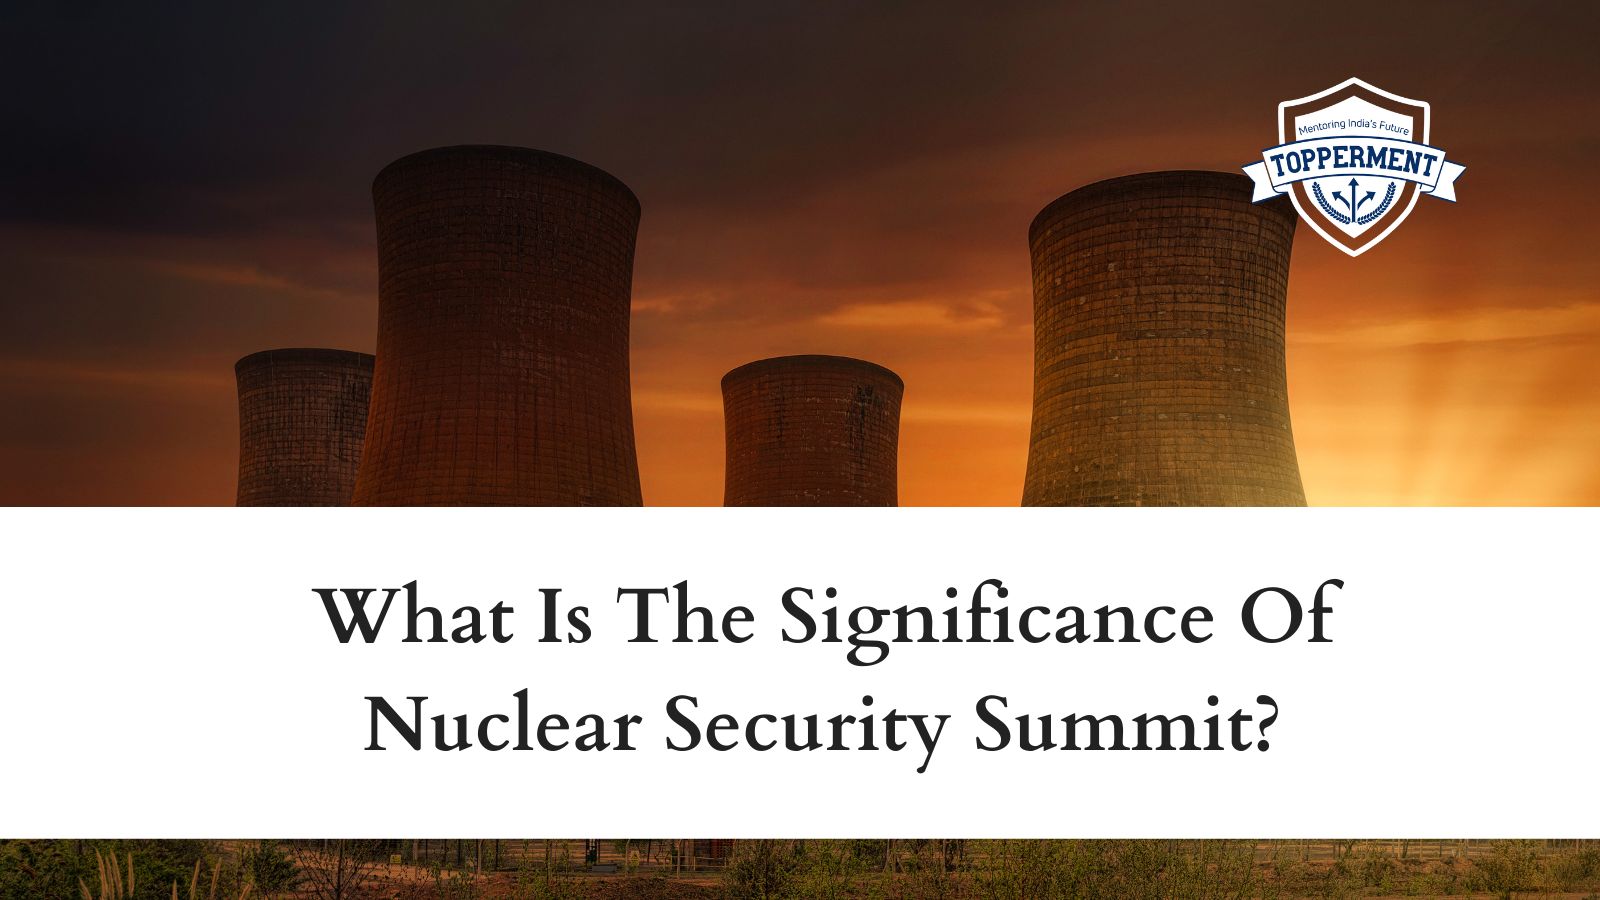 The-Significance-Of-Nuclear-Security-Summit-Best-UPSC-IAS-Coaching-For-Mentorship-And-Guidance